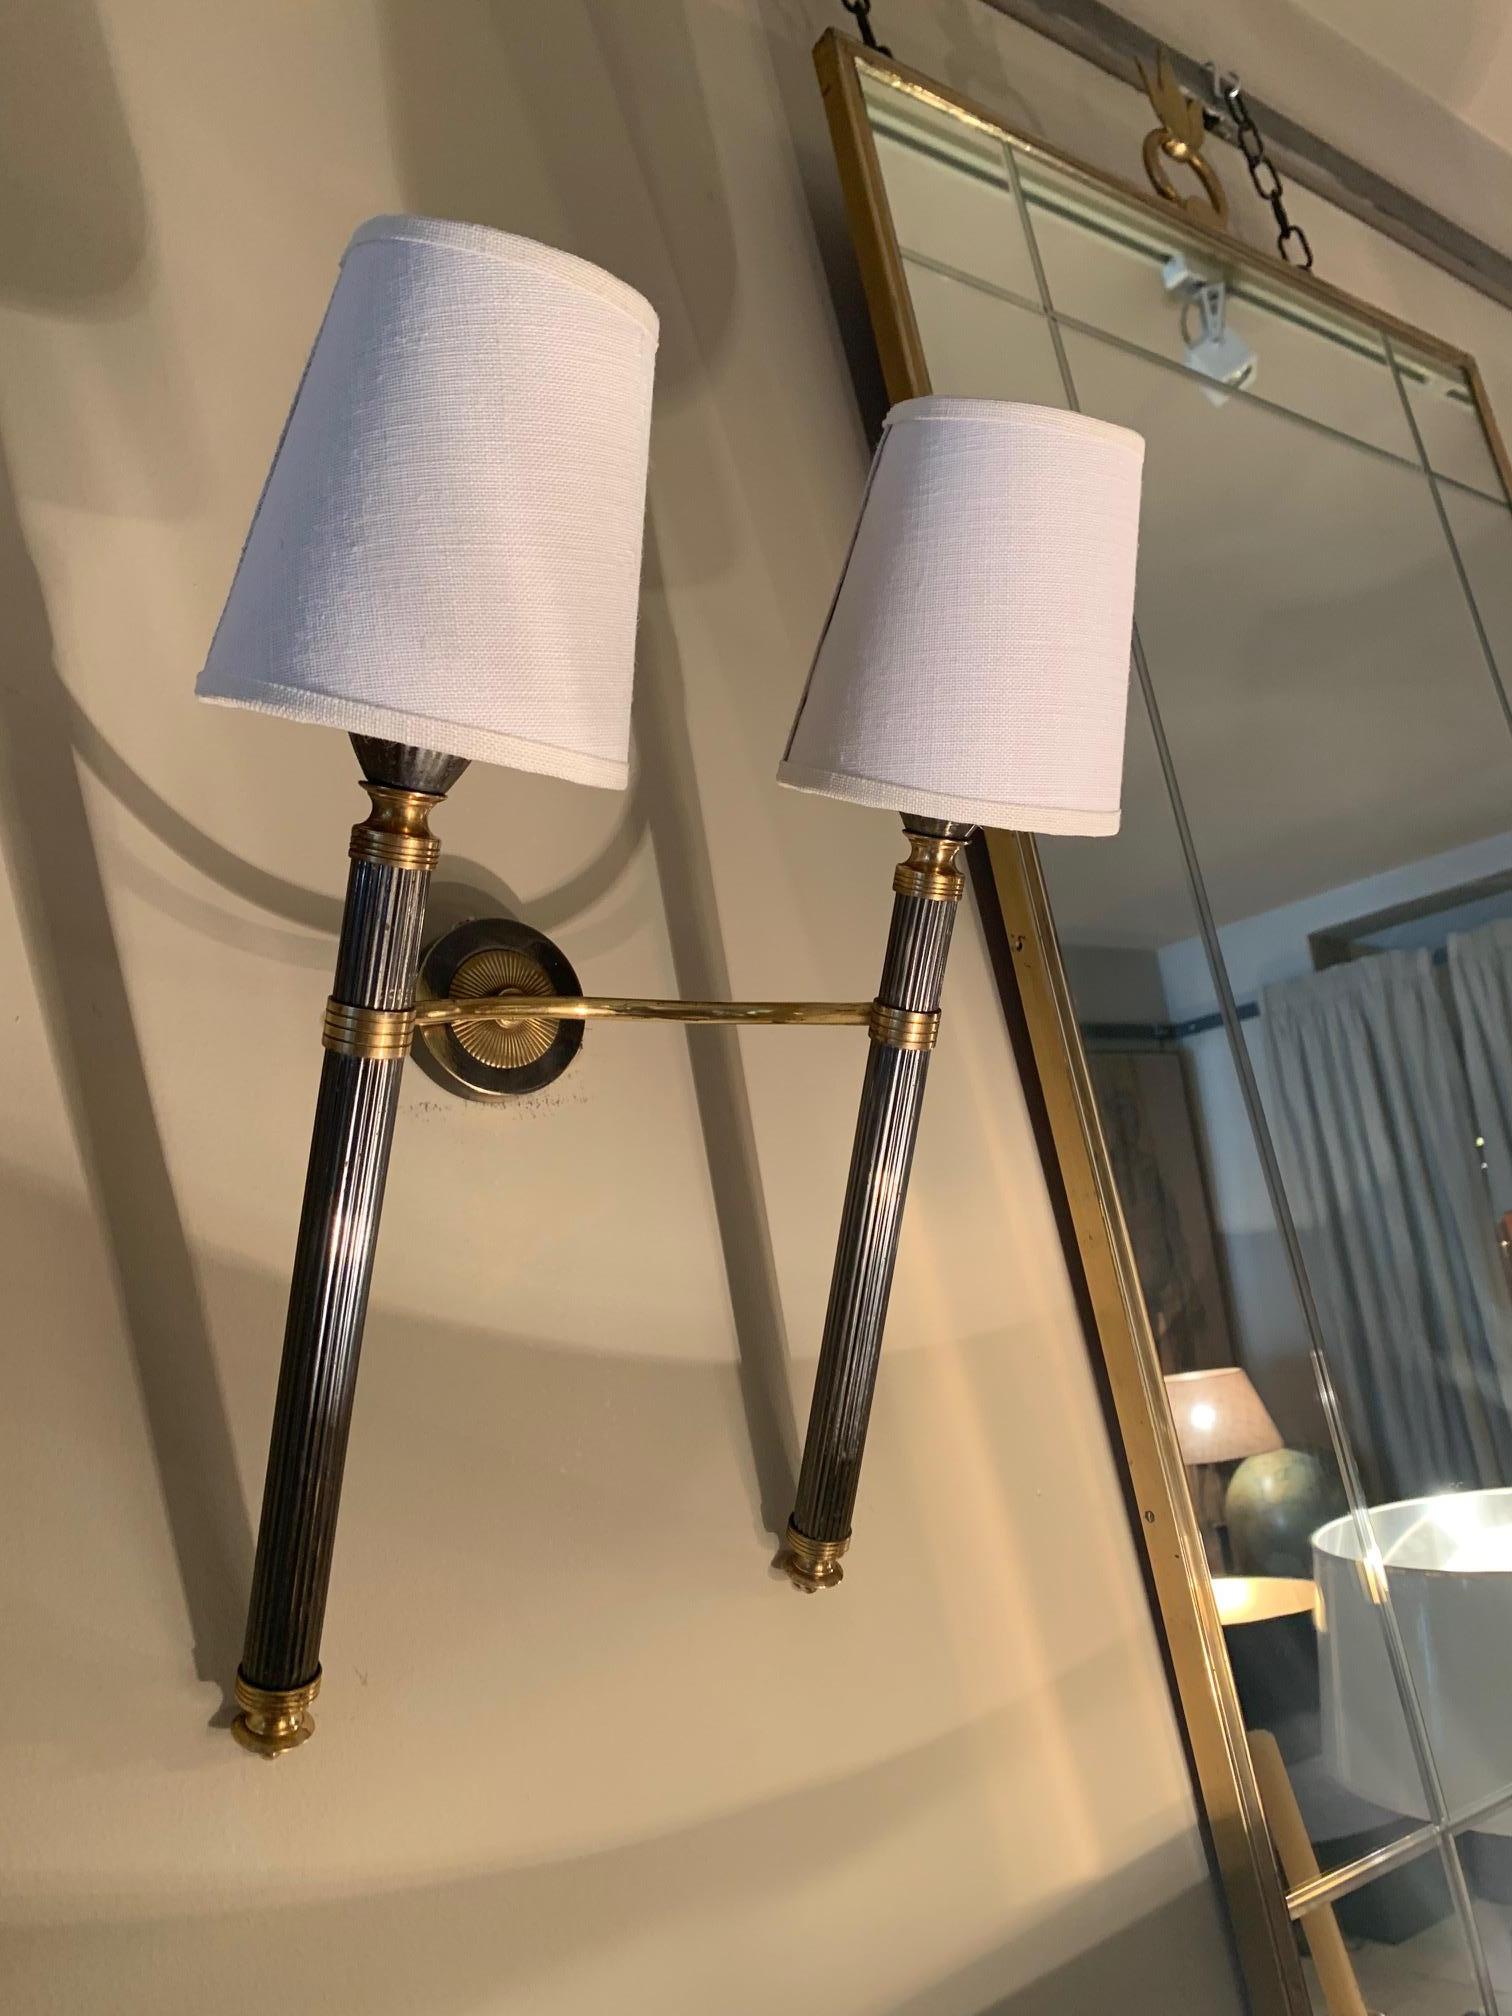 Pair of elegant double wall sconces by Maison Lunel in gilded metal, lacquered and brass, broken white lamp pantalls with gilded interior, 40 watt max, newly wired.